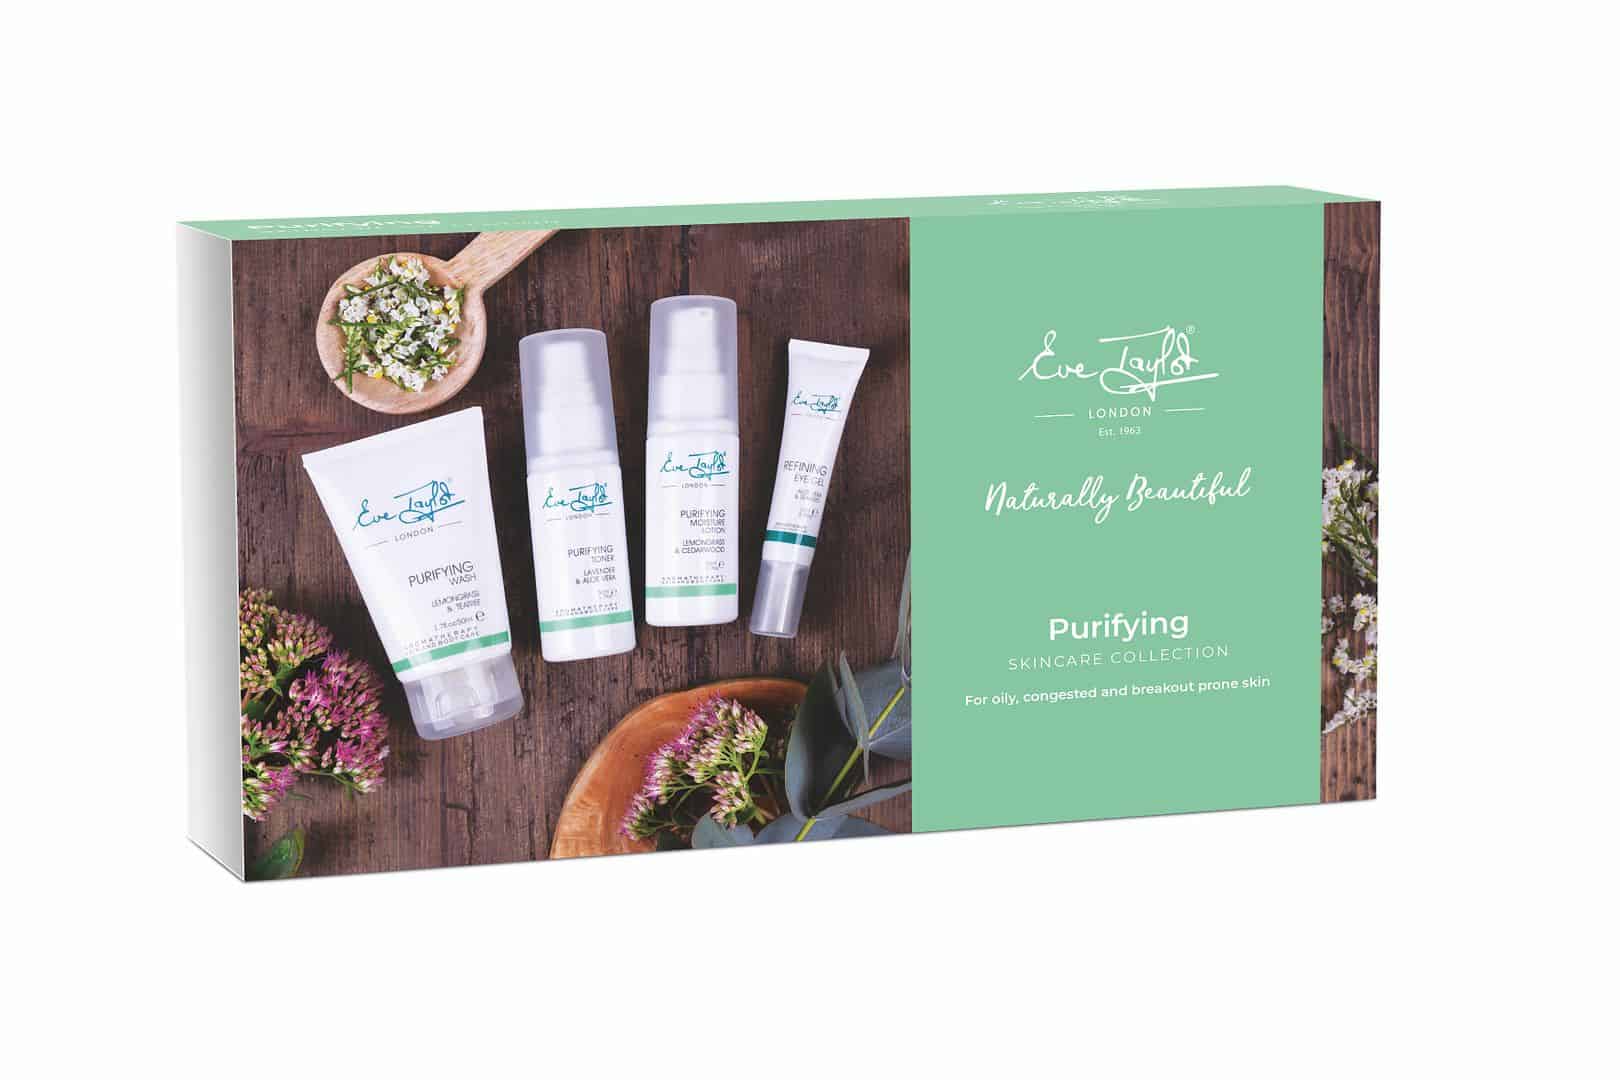 eve taylor purifying skincare collection kit